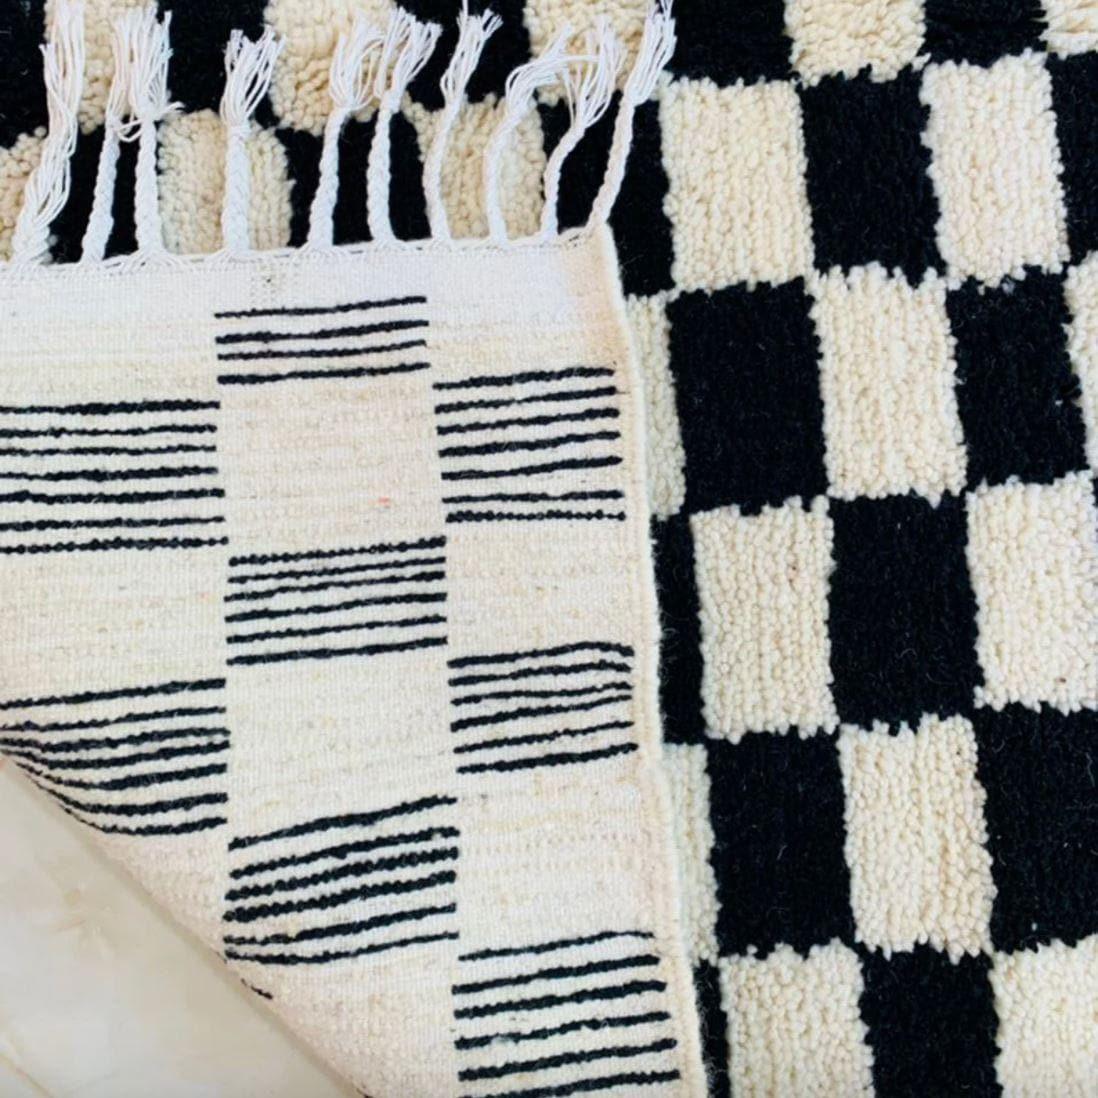 Moroccan Berber Handwoven Checker Wool Area Rug - Black and White - MAIA HOMES